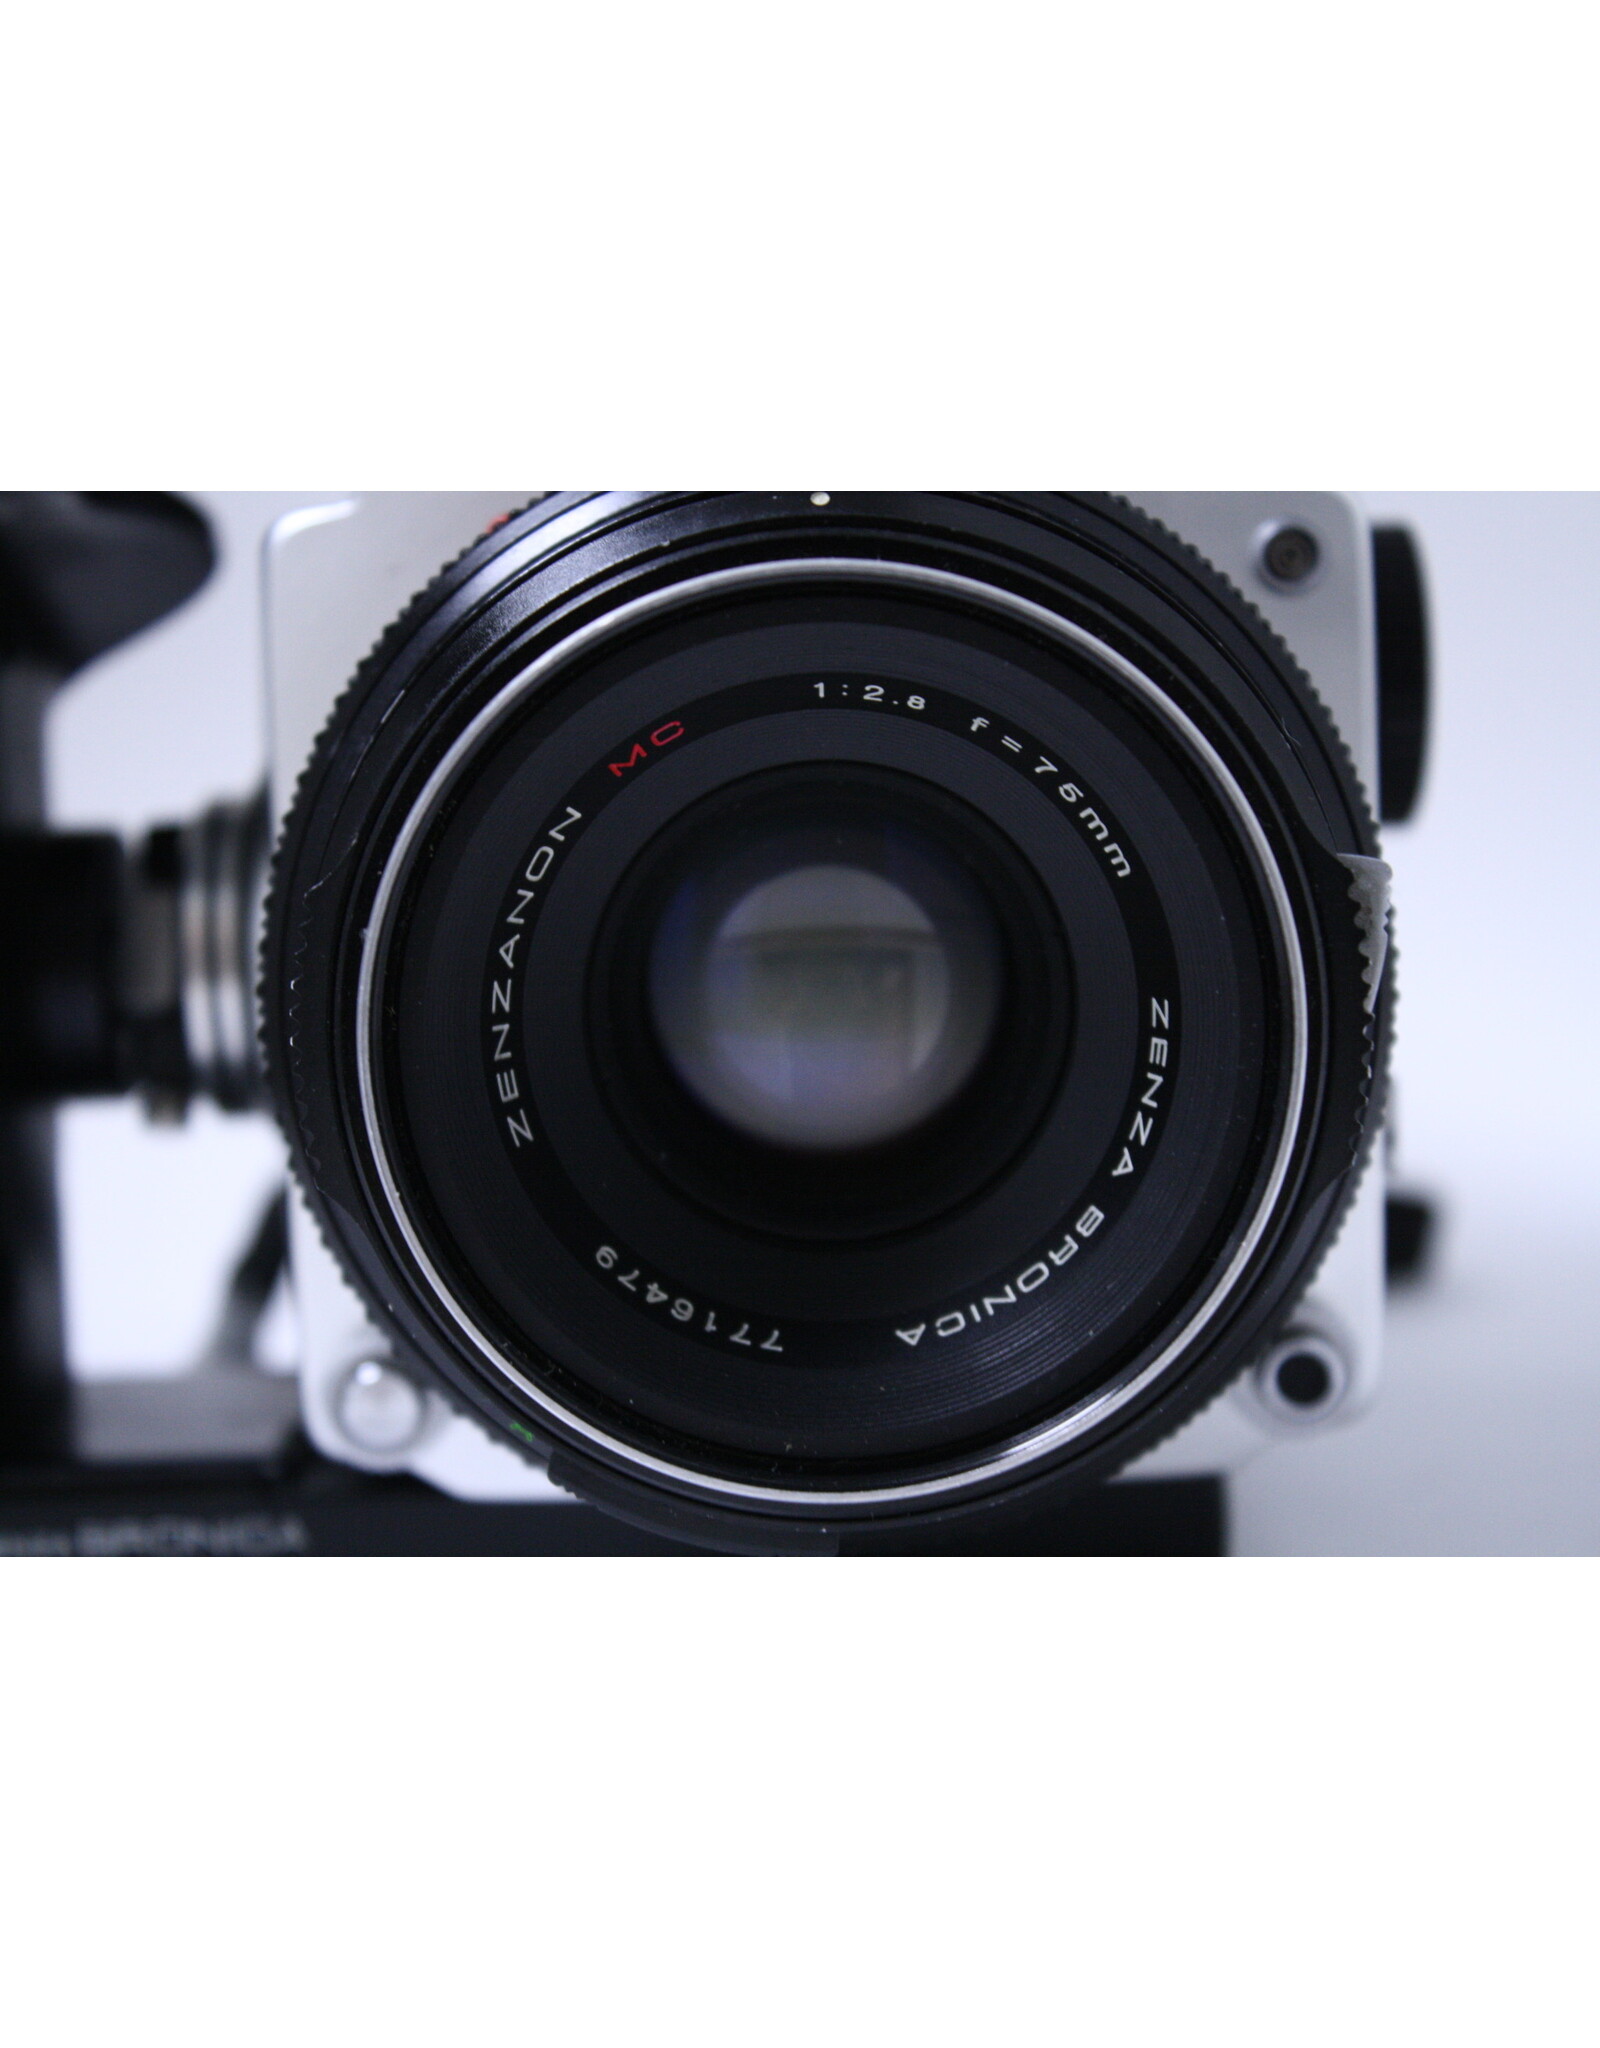 Zenza Bronica ETR with AE Finder,  Back, Grip, and mm f2.8